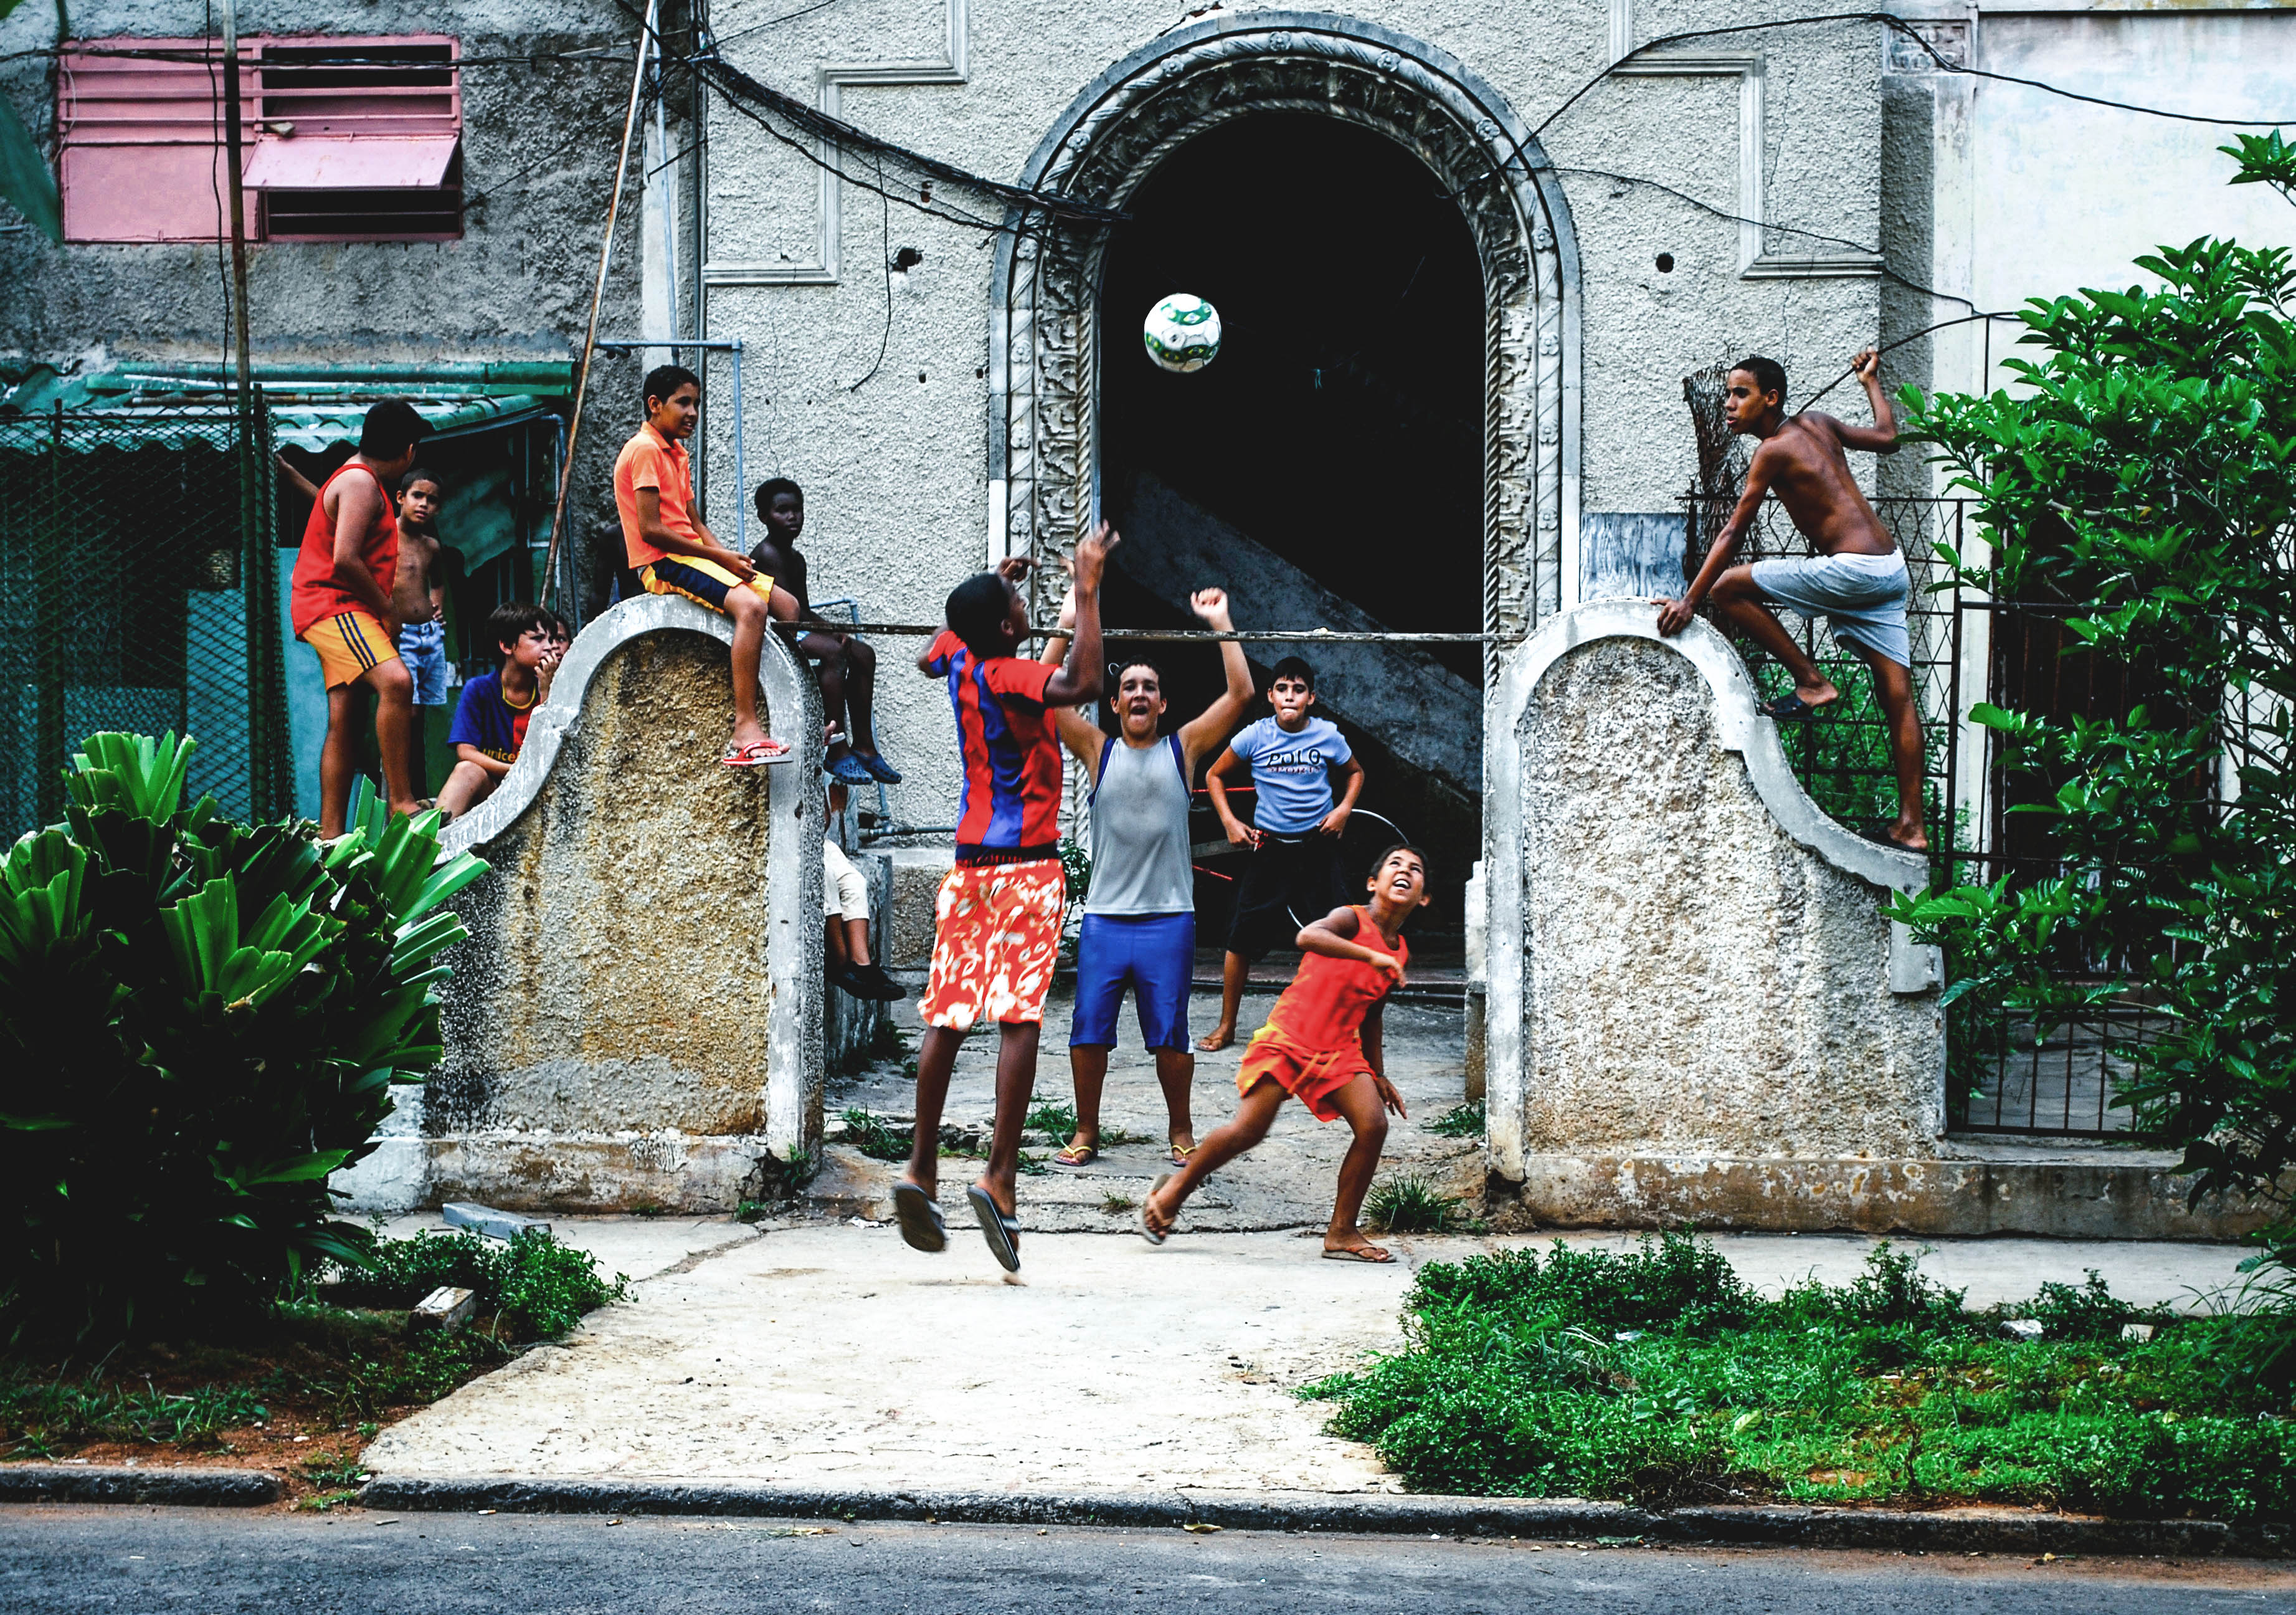  Photography and Culture. A volley home match tales how the kids in La Habana, play sports in street cause the limited sportive places, adaptation. (La Habana, 2011)